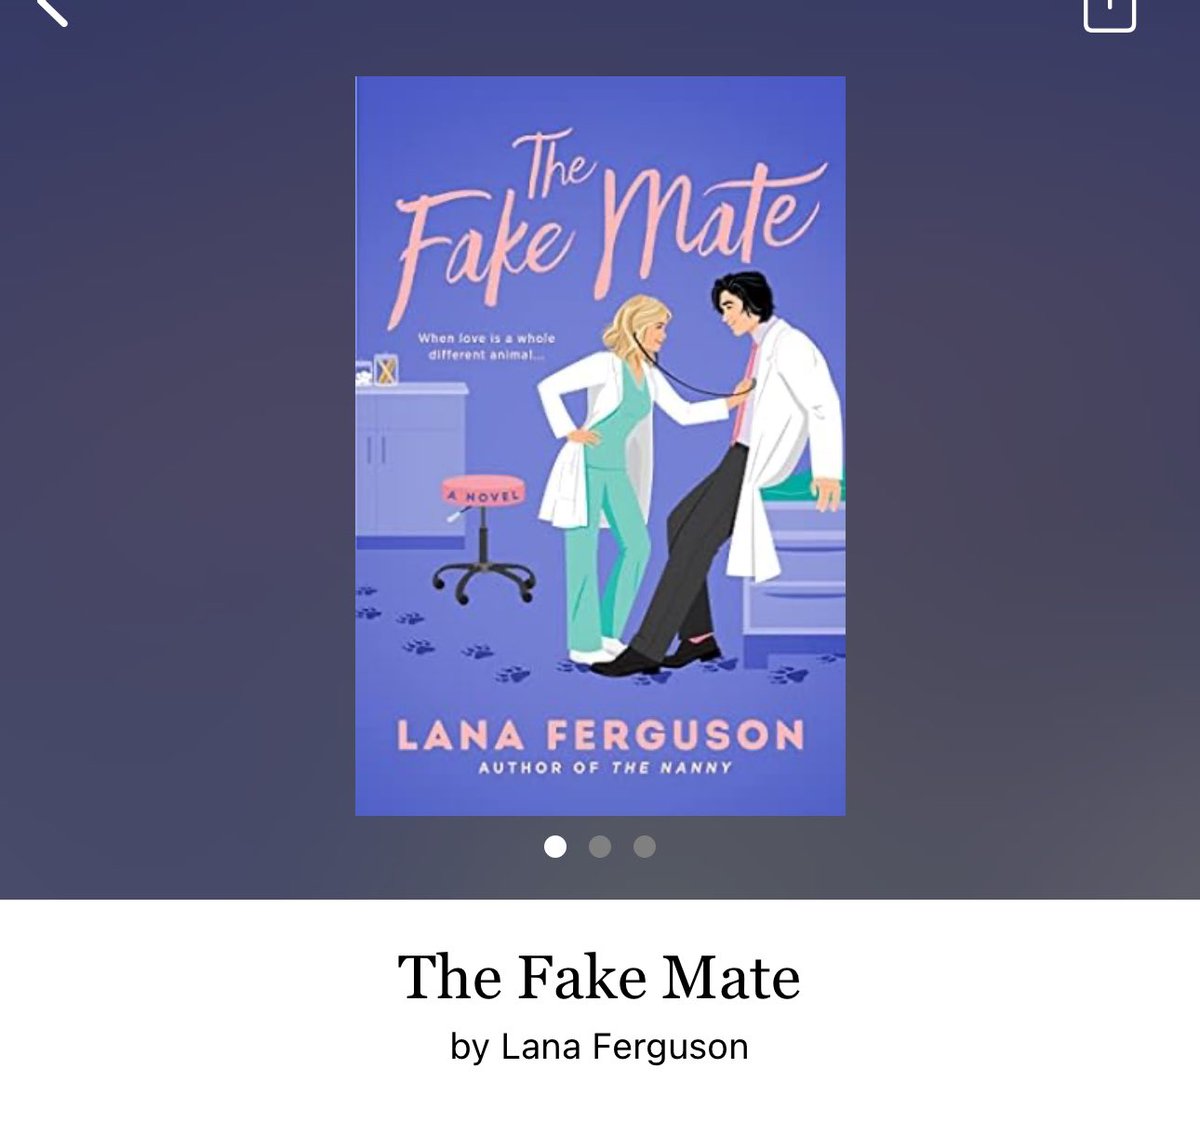 The Fake Mate by Lana Ferguson 

#TheFakeMate by LanaFerguson #6010 #27chapters #400pages #159of400 #NewRelease #Audiobook #34for9 #WolfShifters #MackenzieAndNoah #february2024 #clearingoffreadingshelves #whatsnext #readitquick